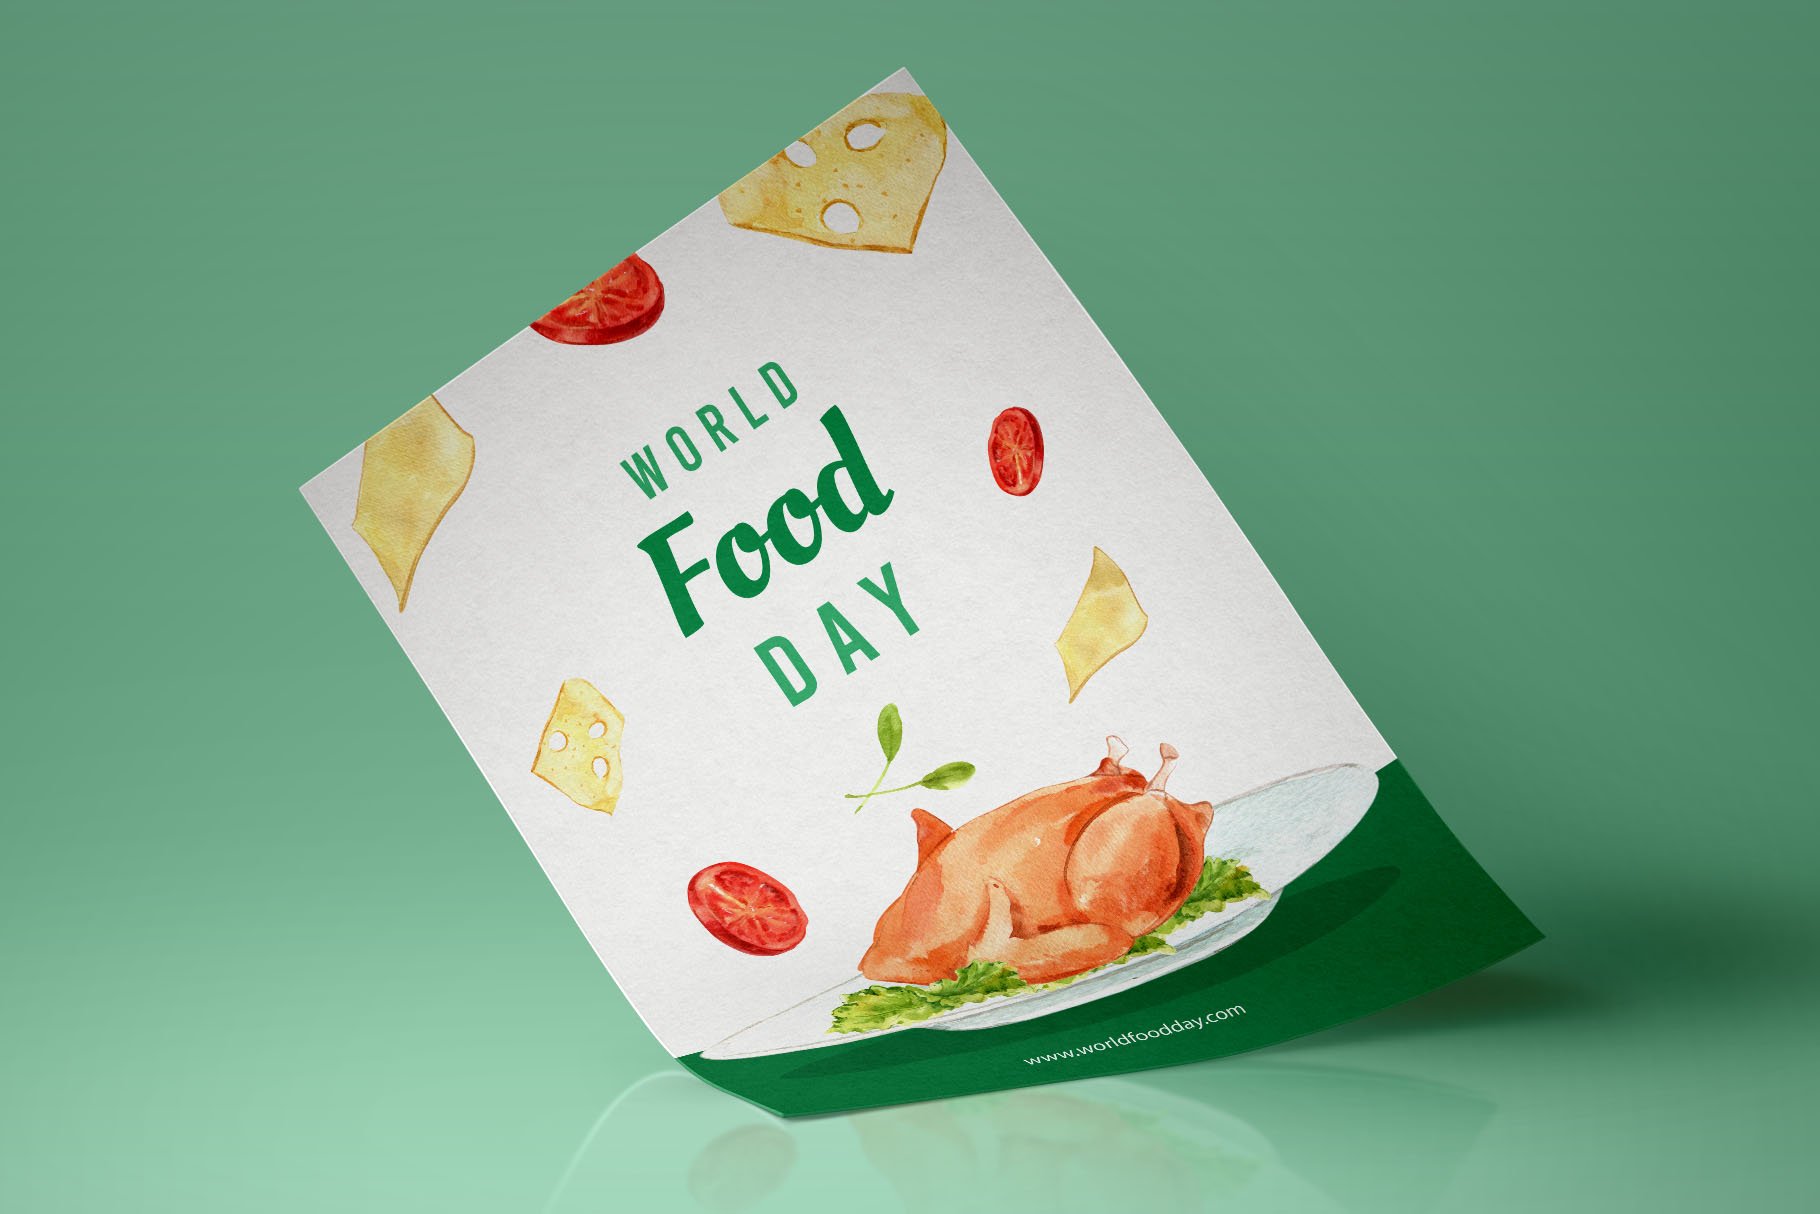 World food day flyers.